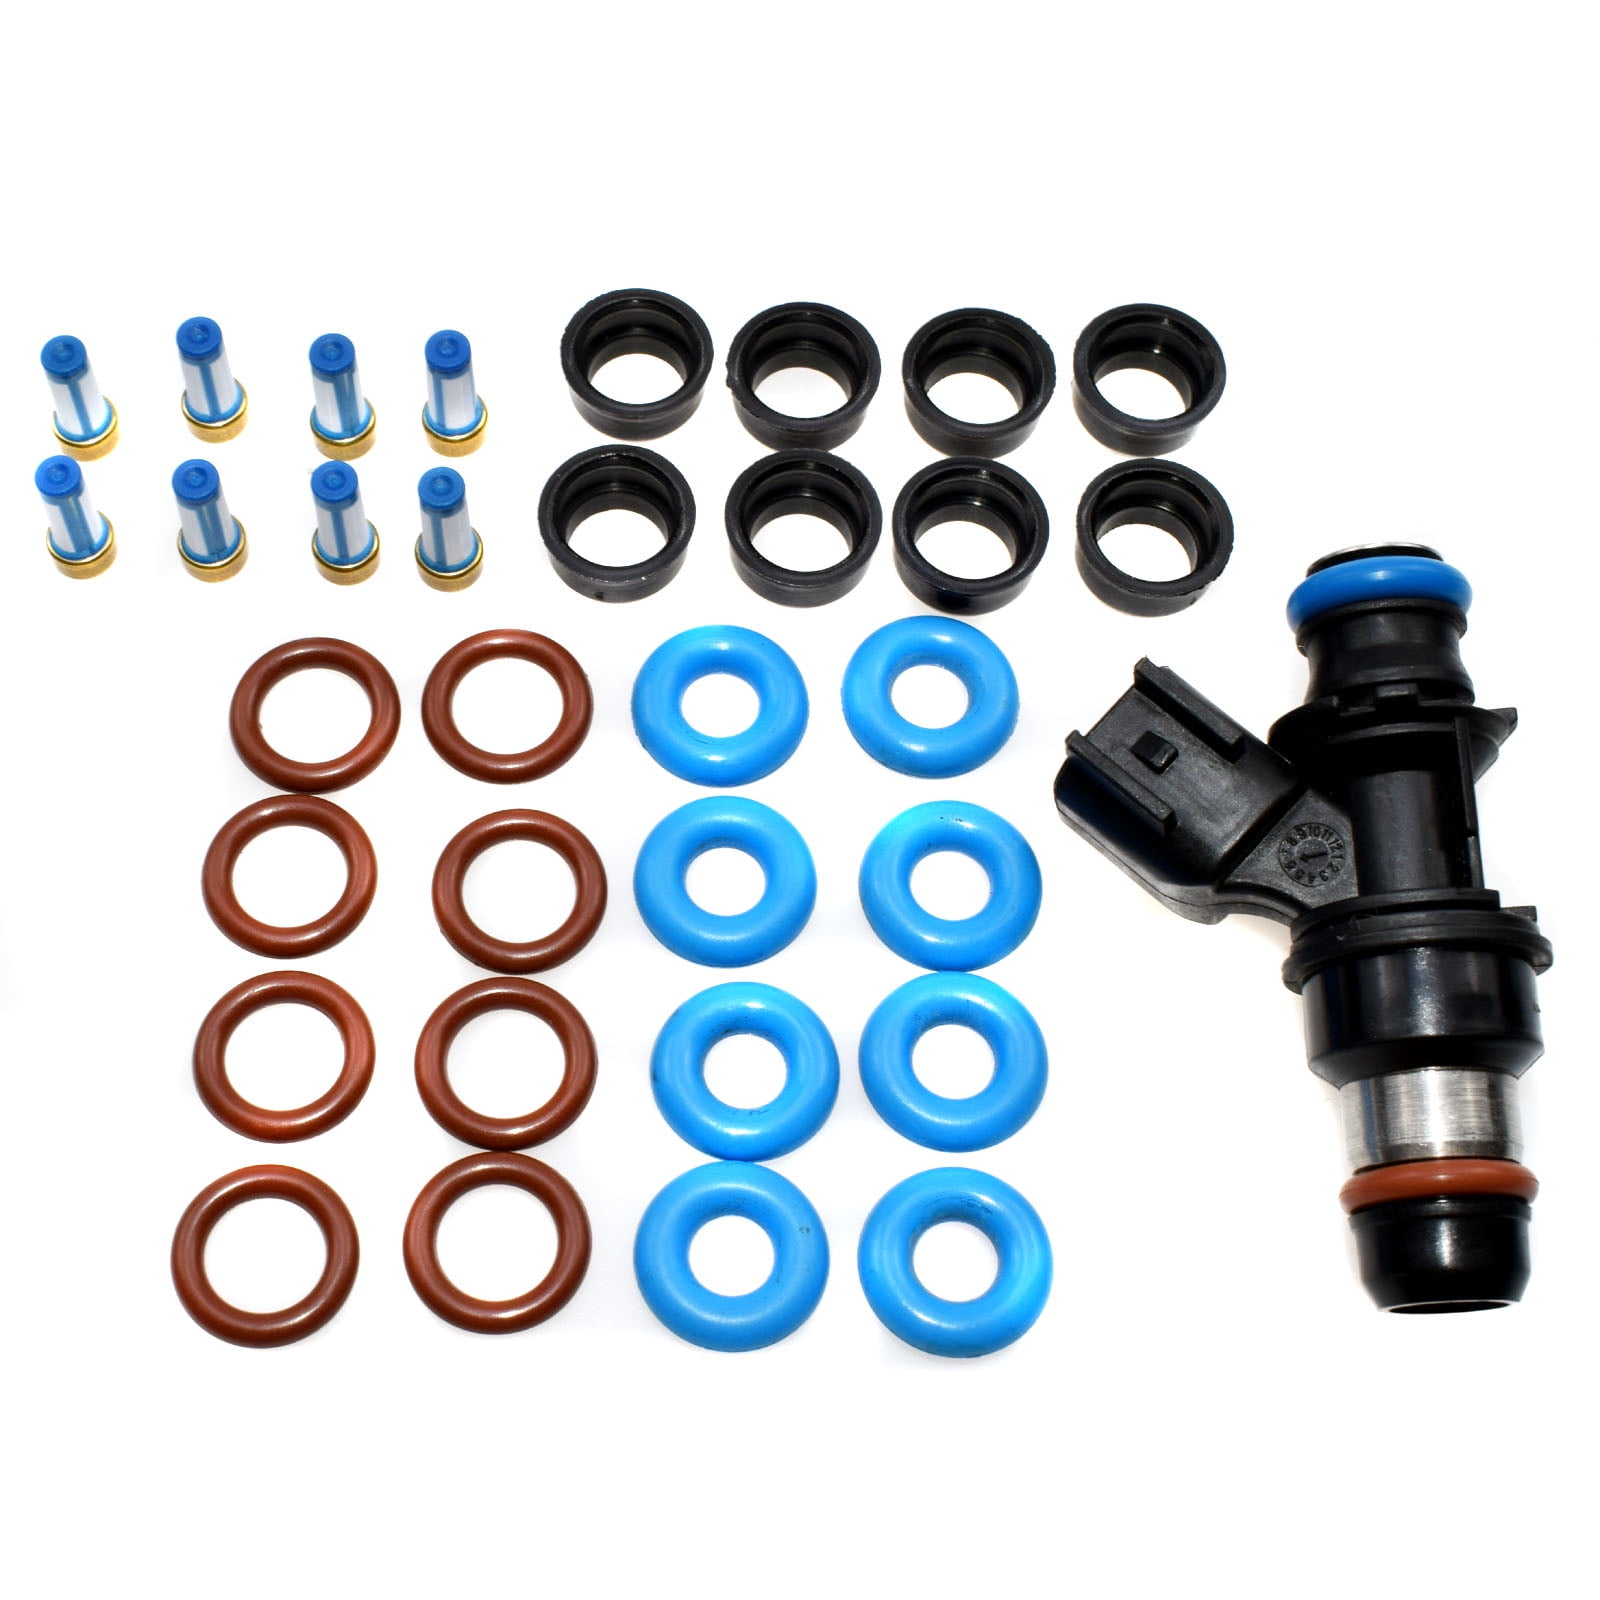 Fuel InjectorRebuild Kit O-rings Filters Pintle V8 For Chevy GMC 25317628 